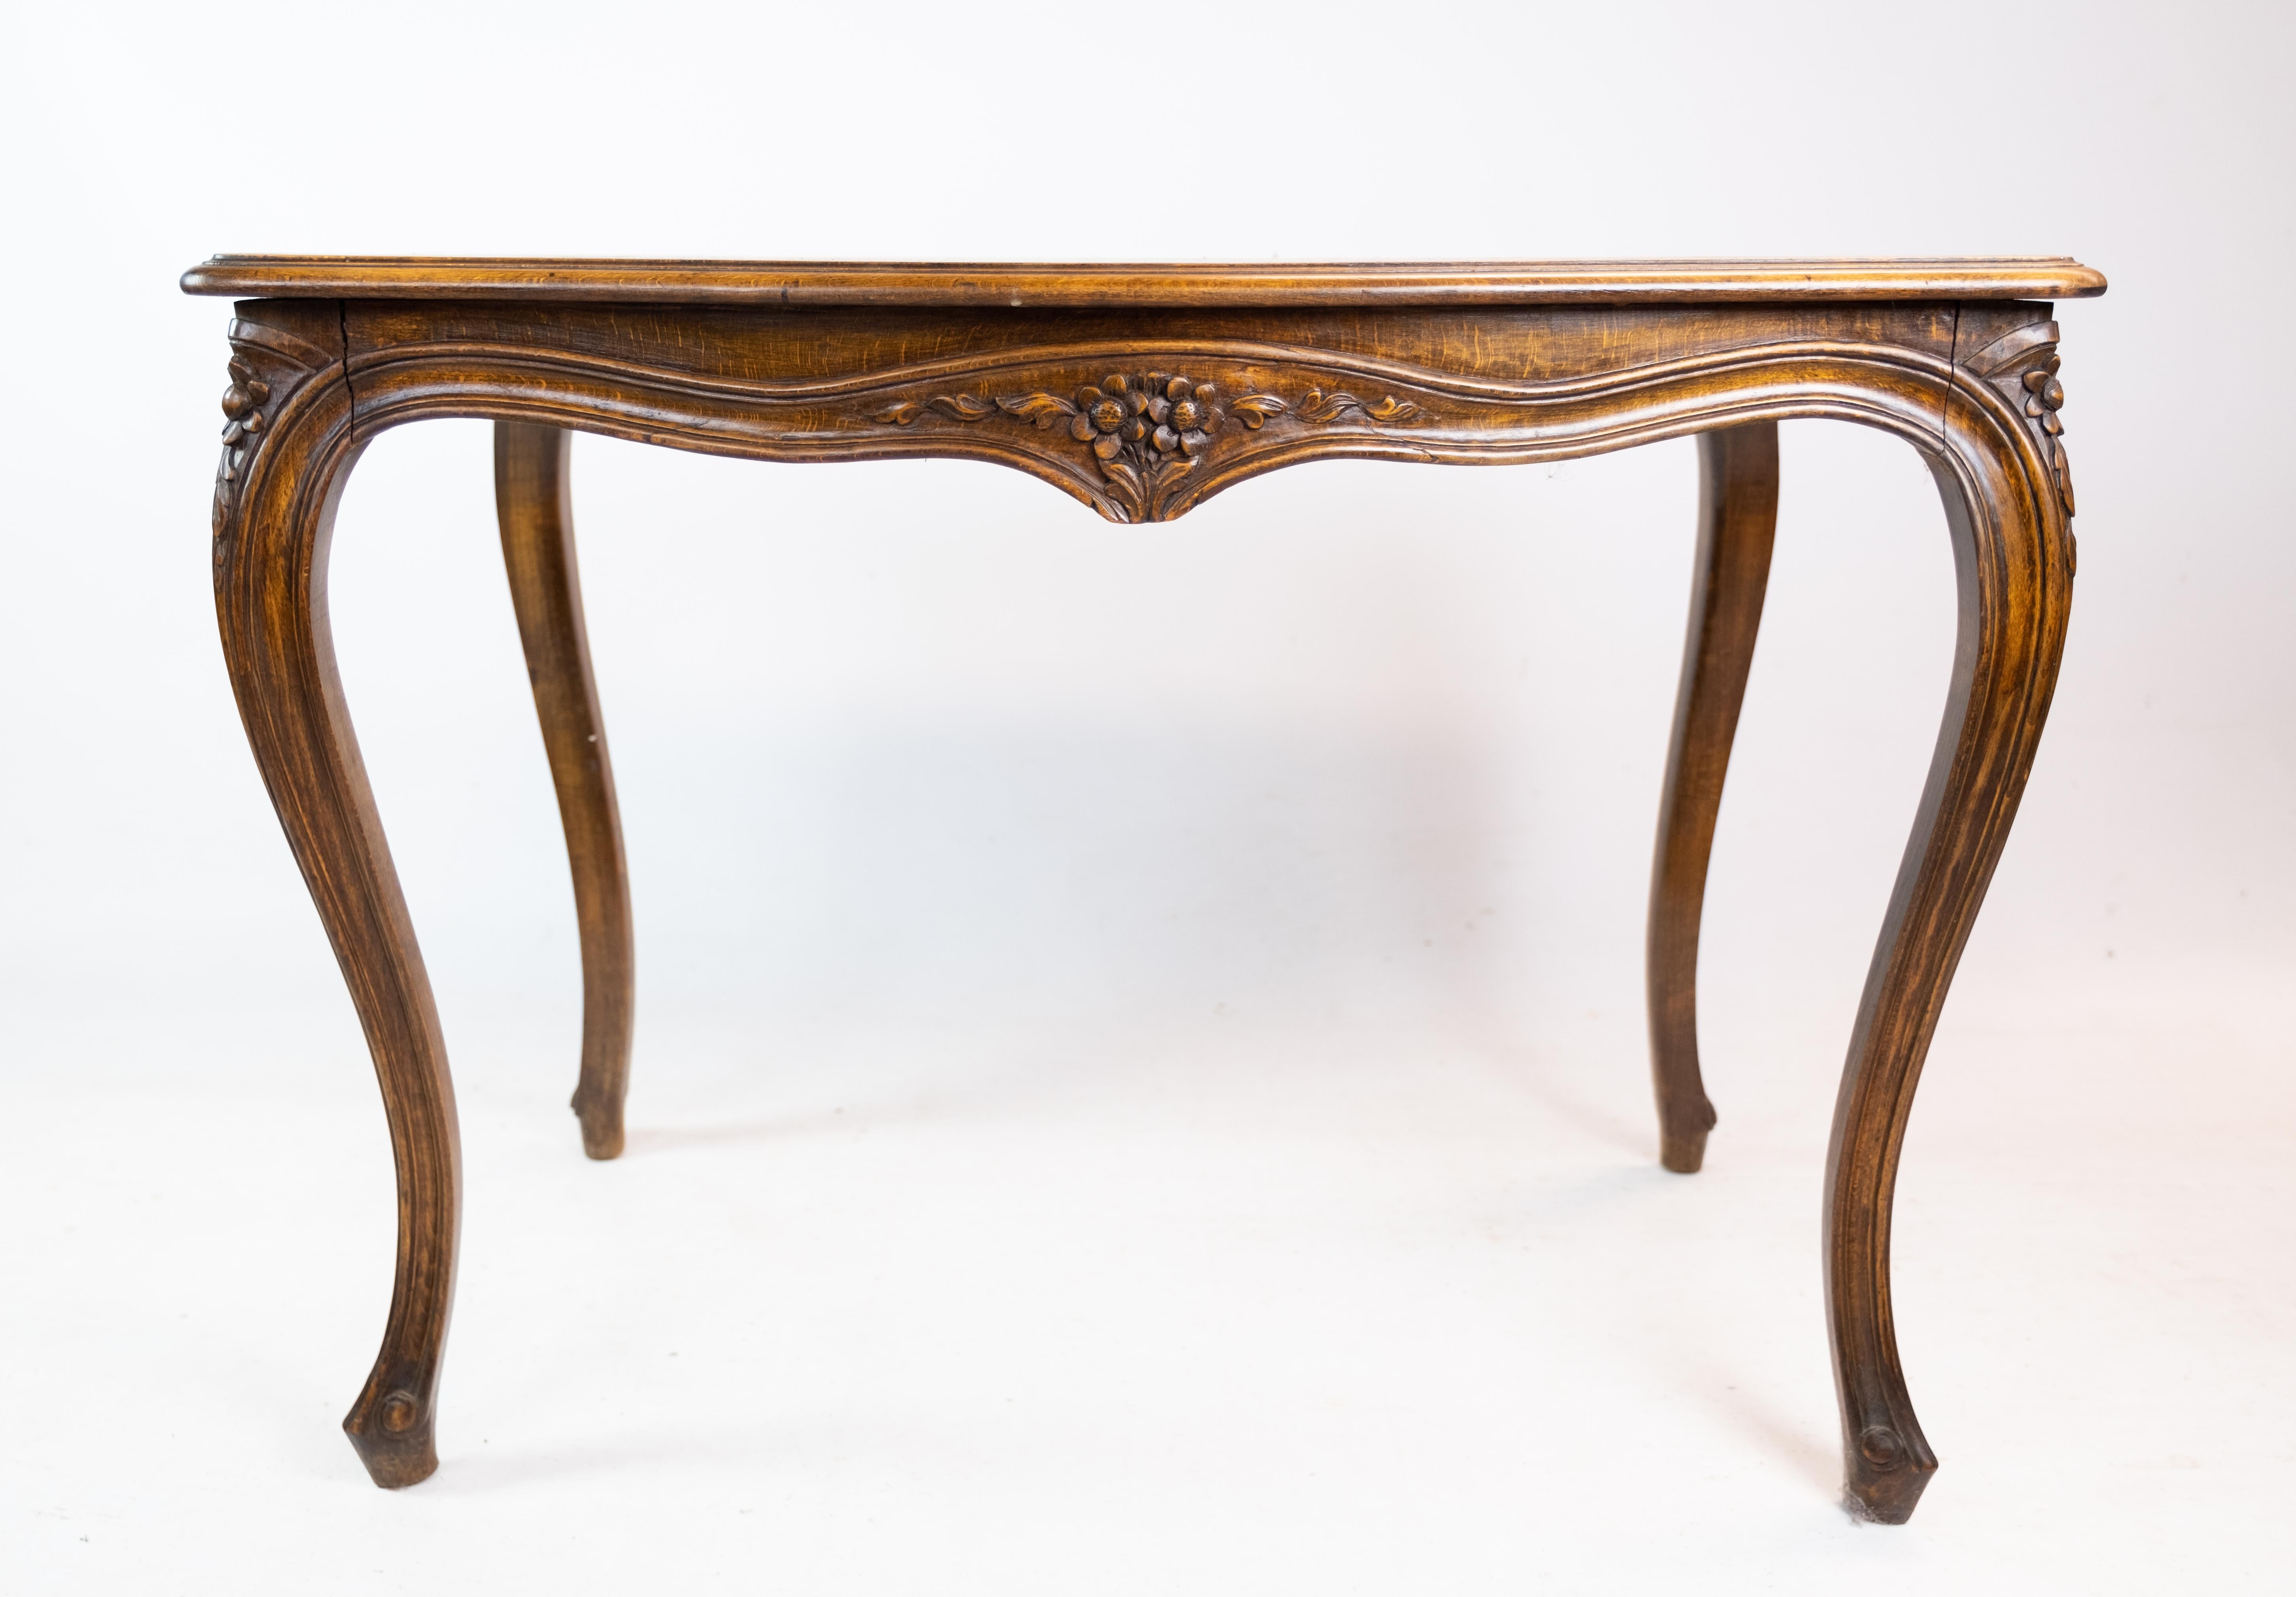 Antique mahogany coffee table with carvings from around the 1880s. Will be repaired & refinished before possible sale.

This product will be inspected thoroughly at our professional workshop by our educated employees, who assure the product